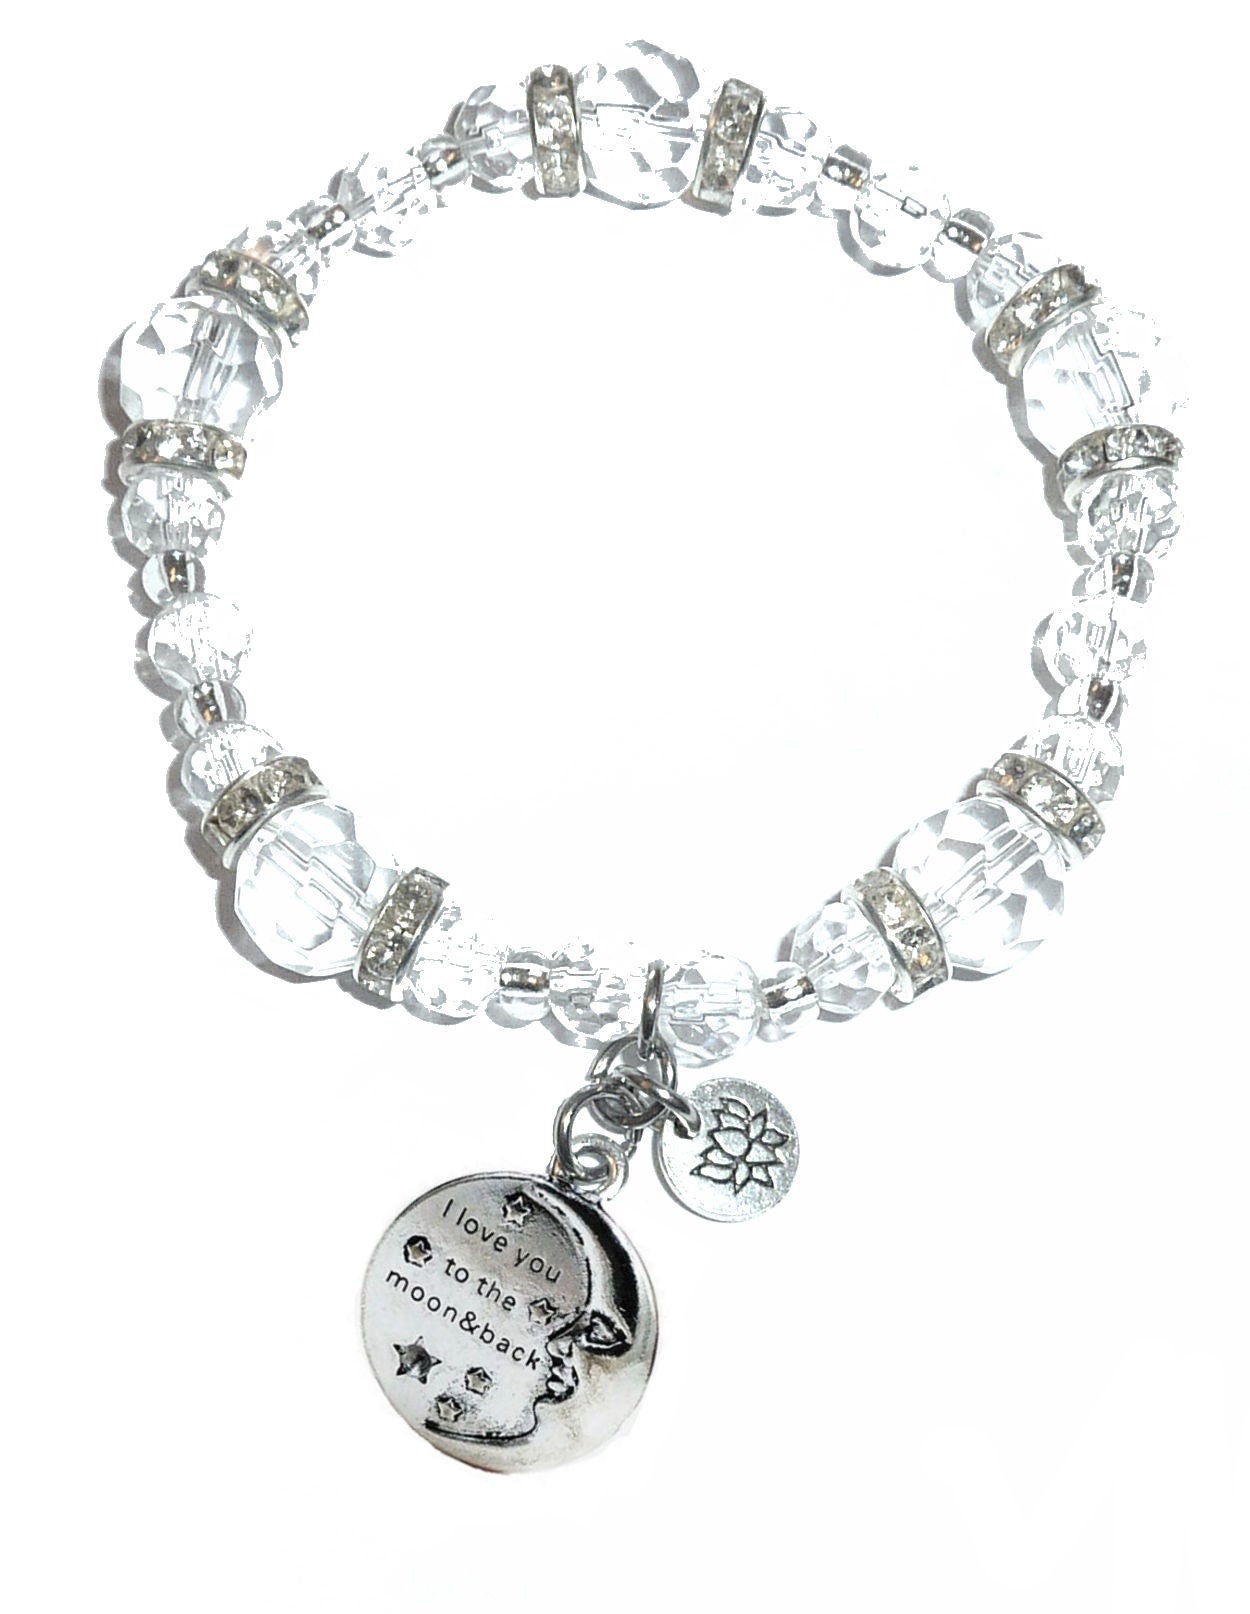 I Love You To The Moon And Back Charm Bracelet - Crystal Stretch